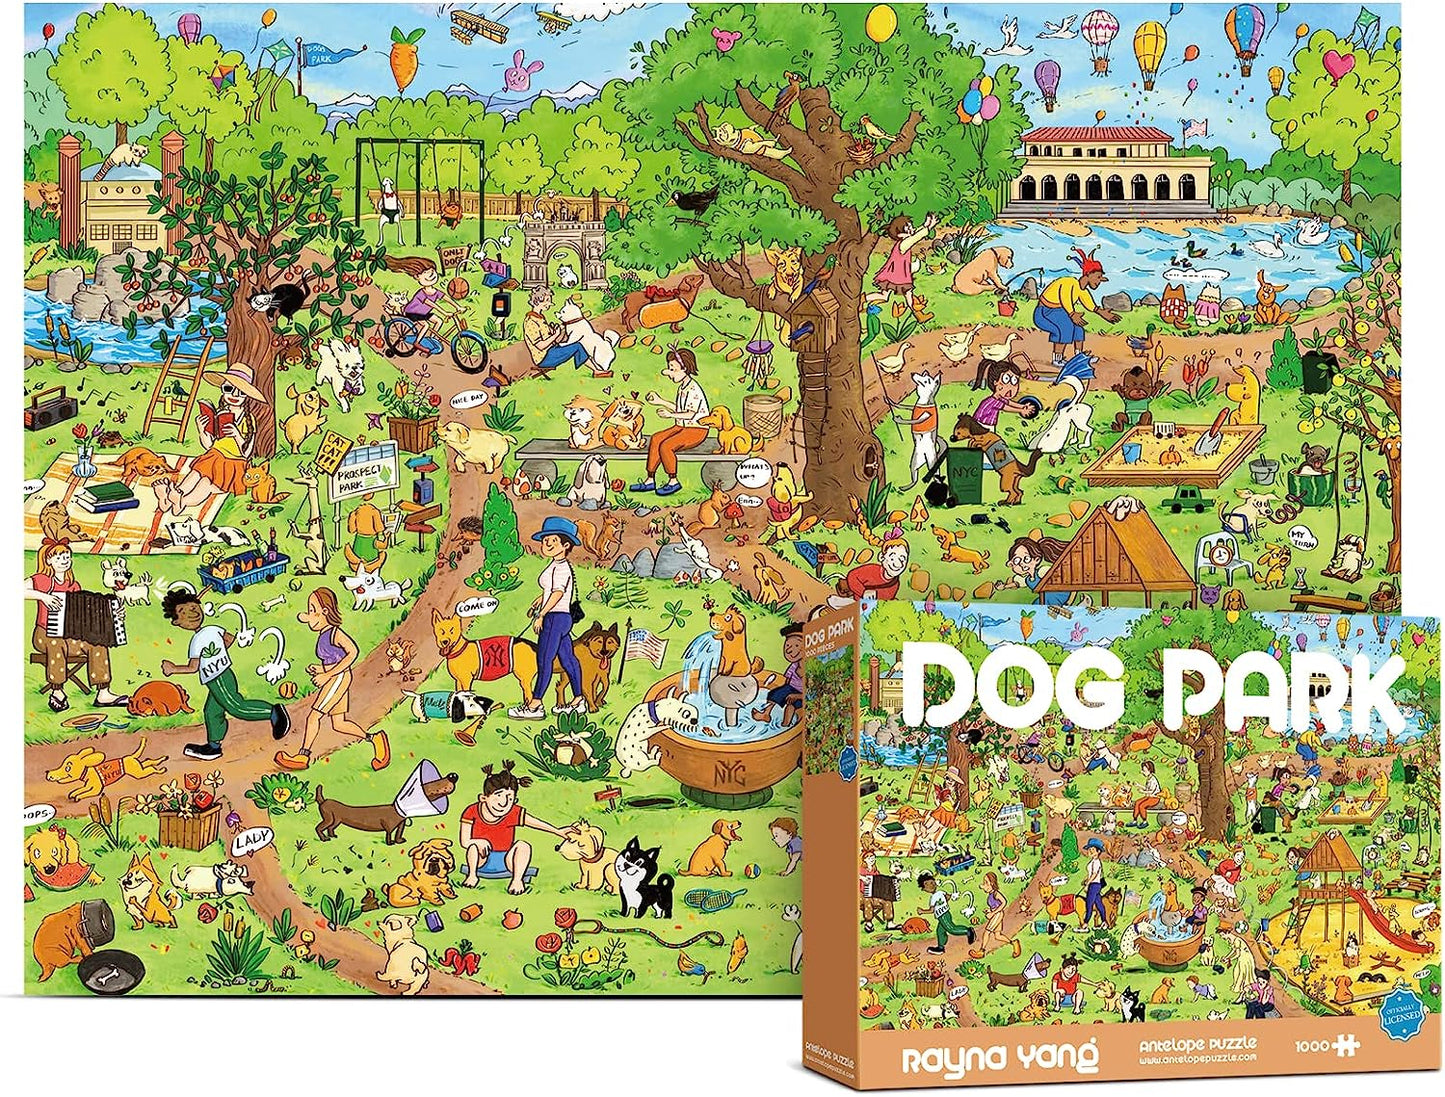 Antelope 2 in 1 1000 Piece Puzzle Bundle - Dog Park - 1000 Piece Jigsaw Puzzle Bundle with Drive In Movie - 1000 Piece Jigsaw Puzzle